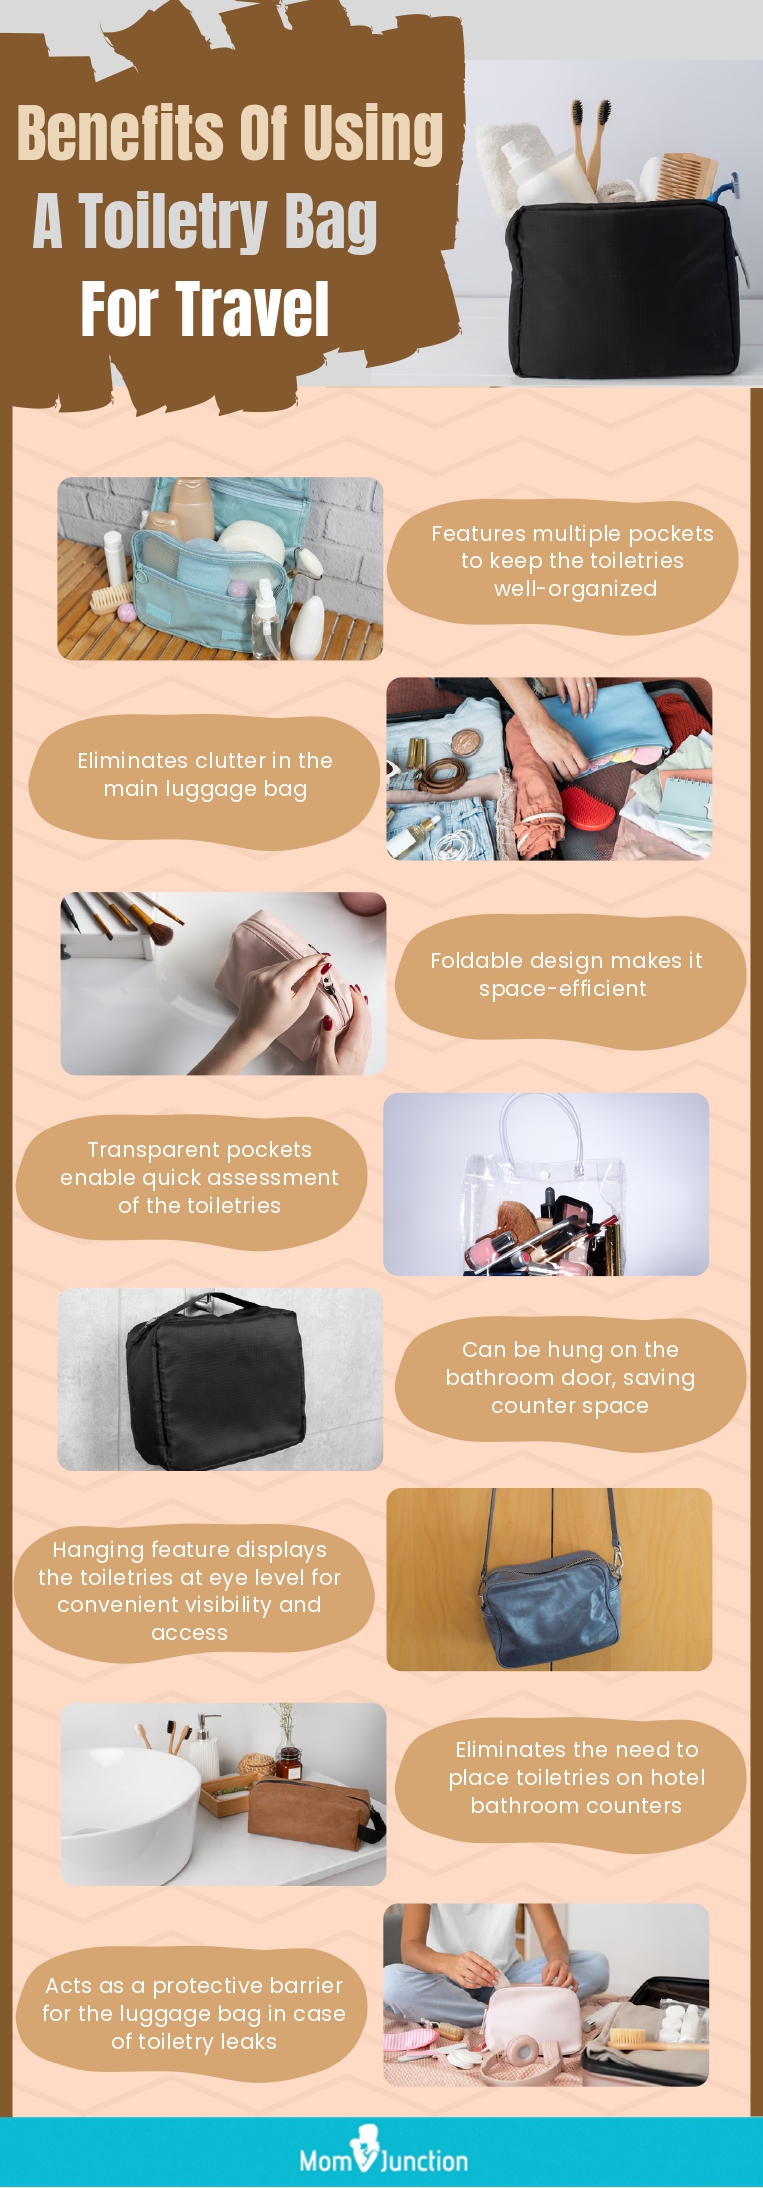 Benefits Of Using A Toiletry Bag For Travel (infographic)